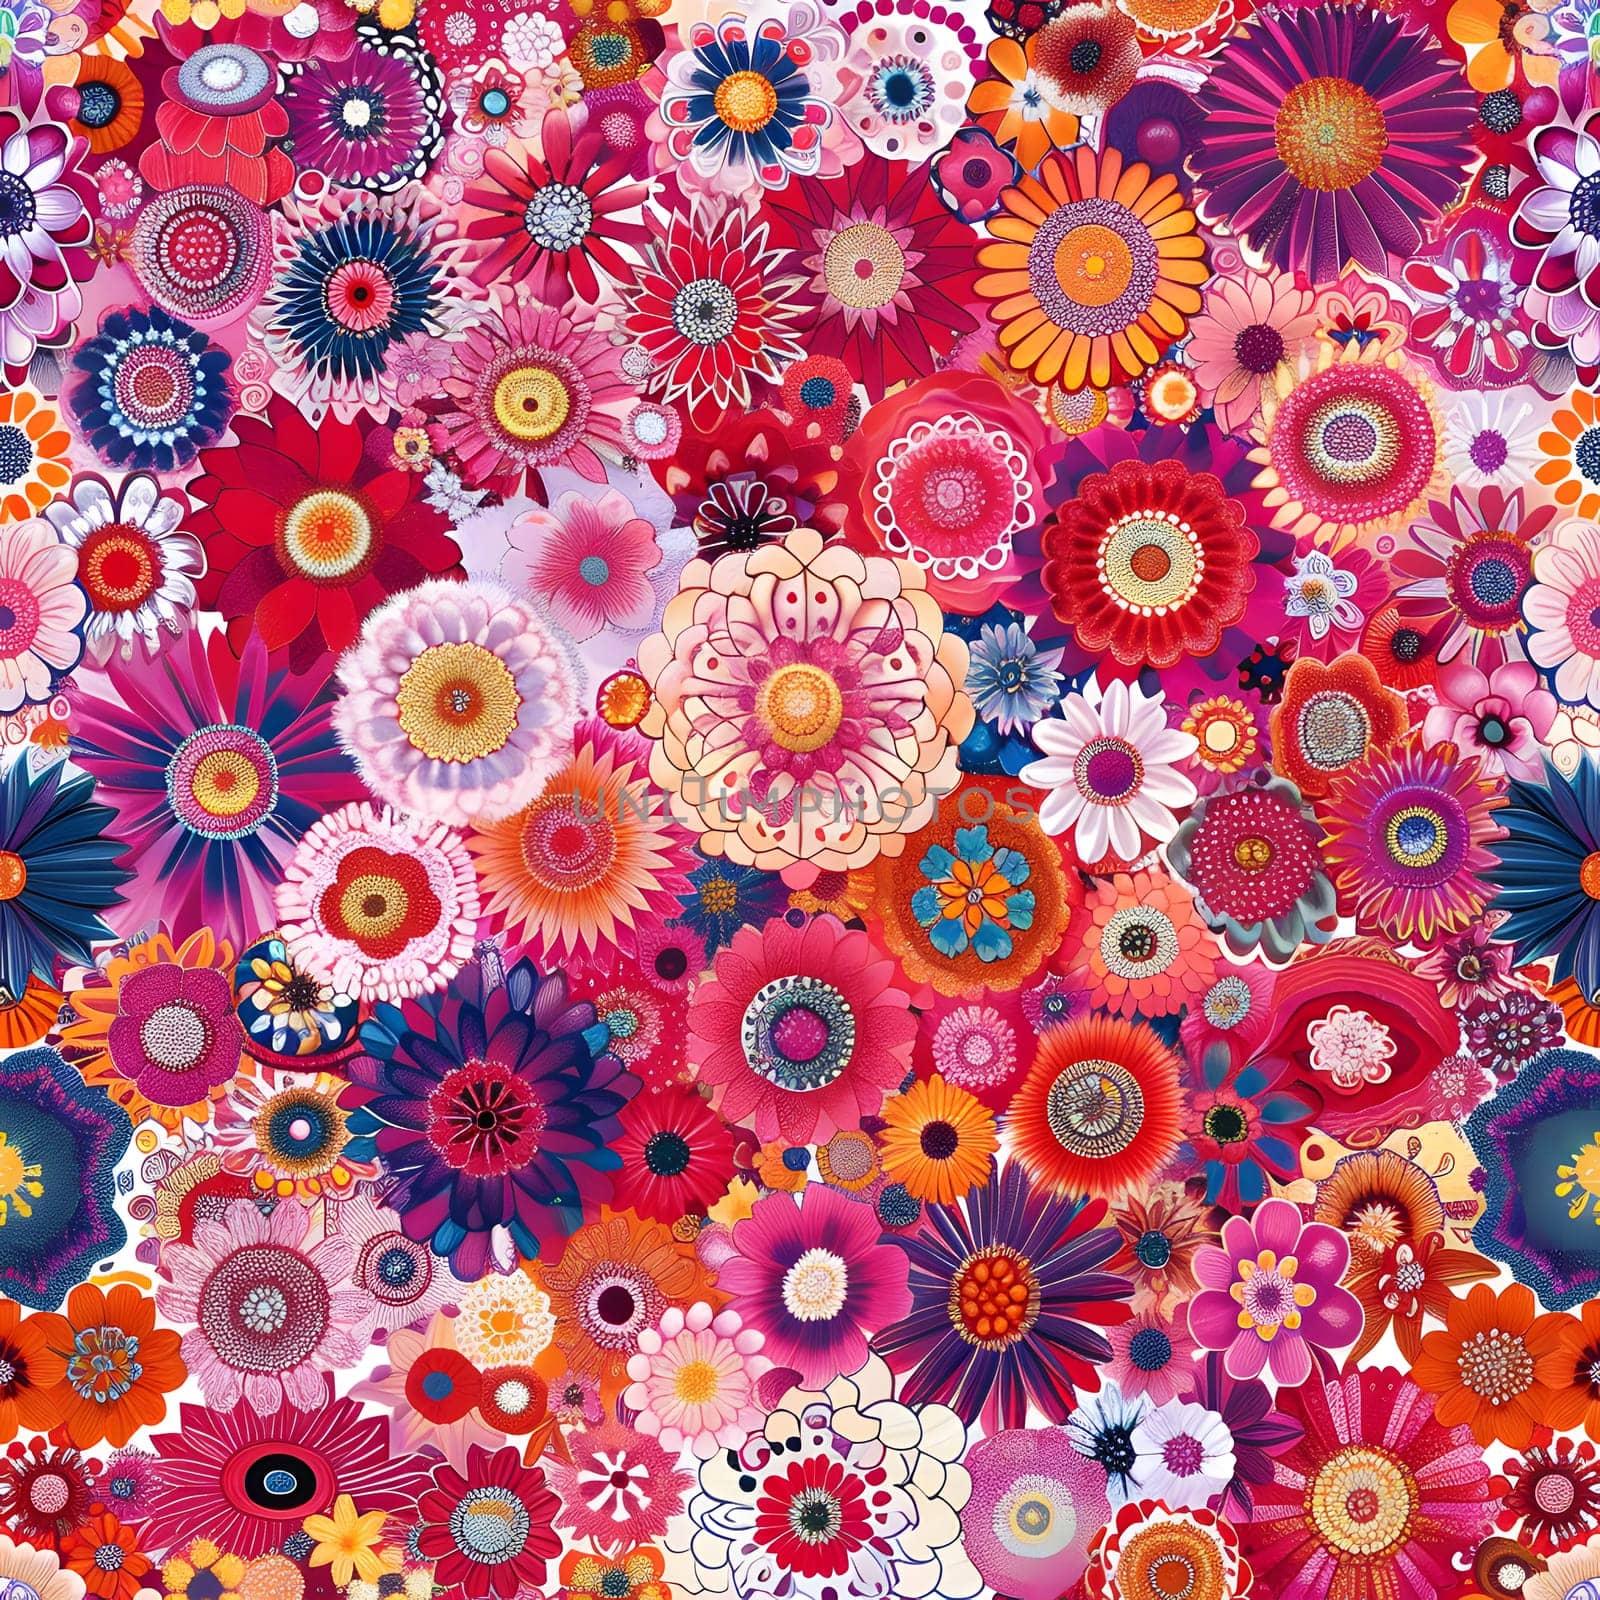 Colorful flowers create a vibrant pattern on a white canvas by Nadtochiy